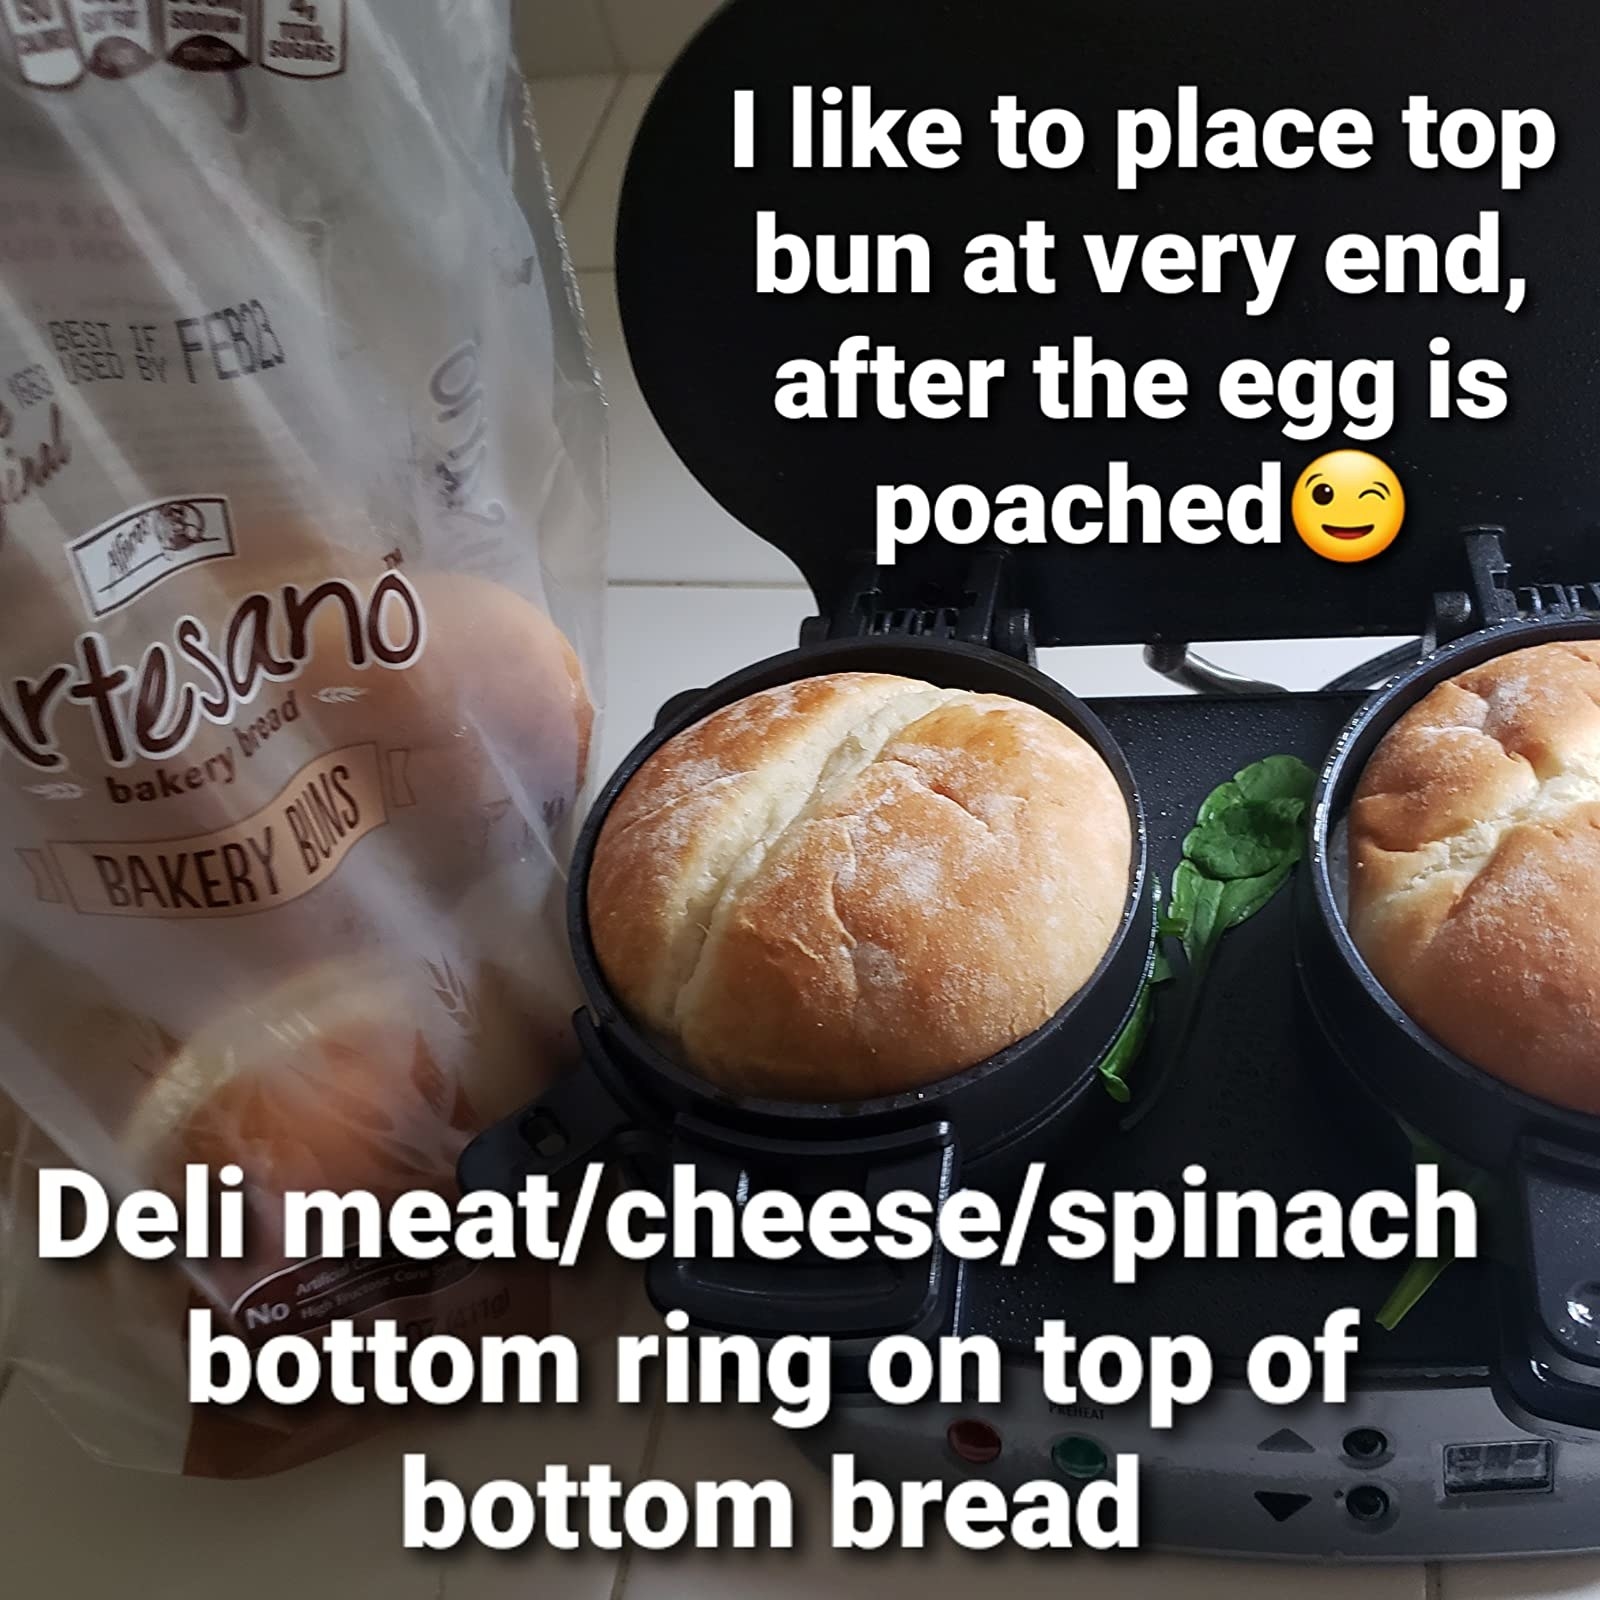 A reviewer makes sandwiches with the product. Text on the image reads: &quot;I like to place top bun at the very end after the egg is poached. Deli meat/cheese/ spinach bottom ring on top of bottom bread.&quot;